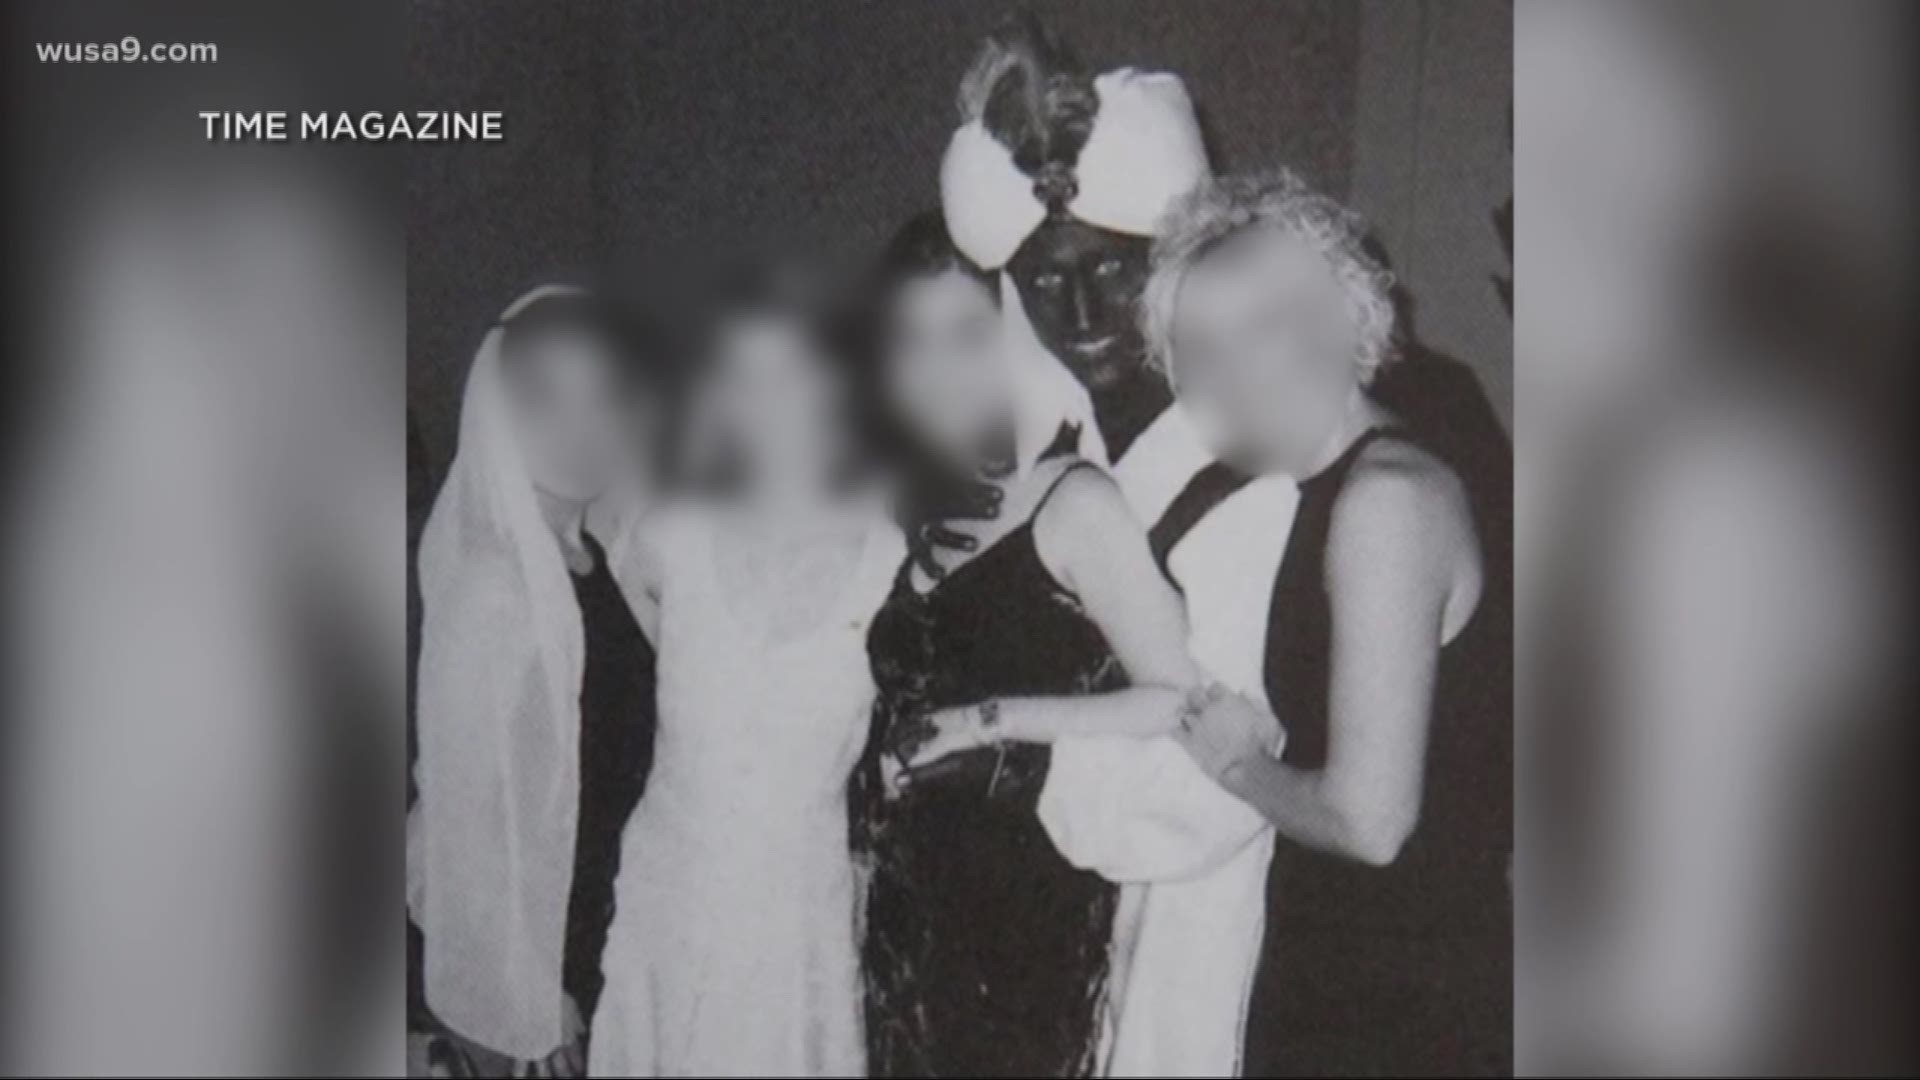 Canadian Prime Minister Justin Trudeau is apologizing for wearing blackface. The photo comes from his old yearbook.